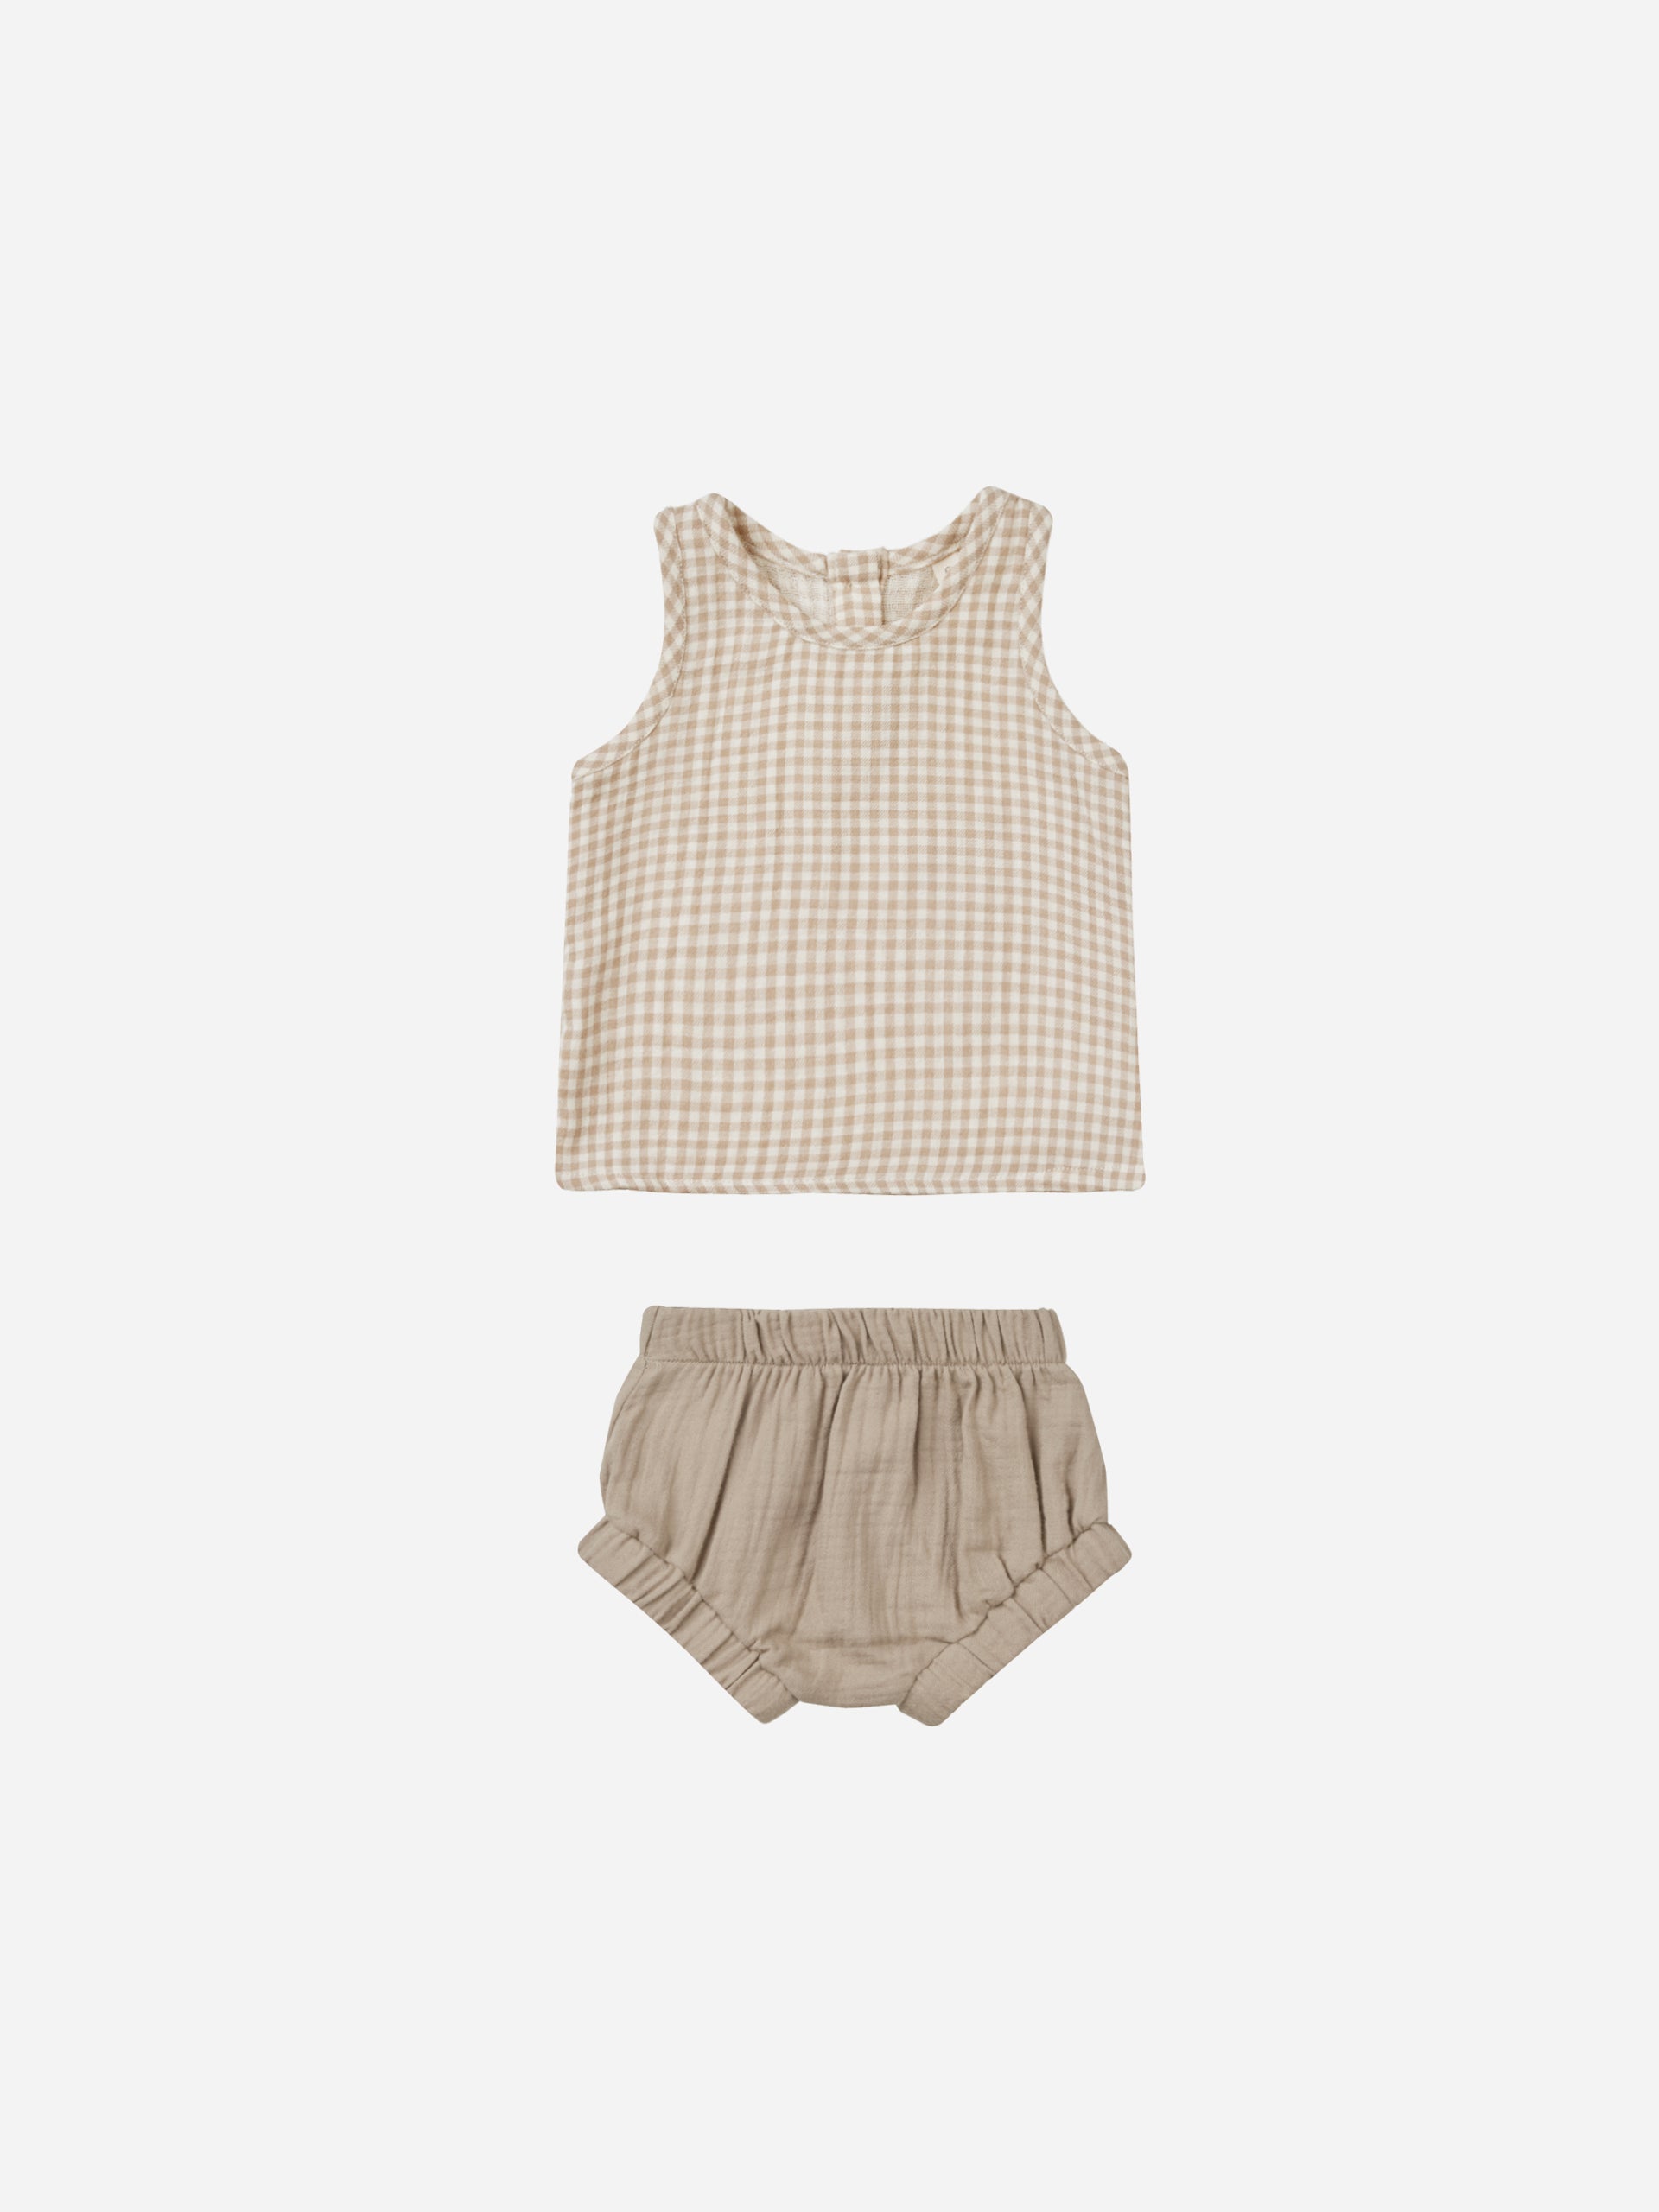 Woven Tank + Short Set || Oat Gingham - Rylee + Cru | Kids Clothes | Trendy Baby Clothes | Modern Infant Outfits |